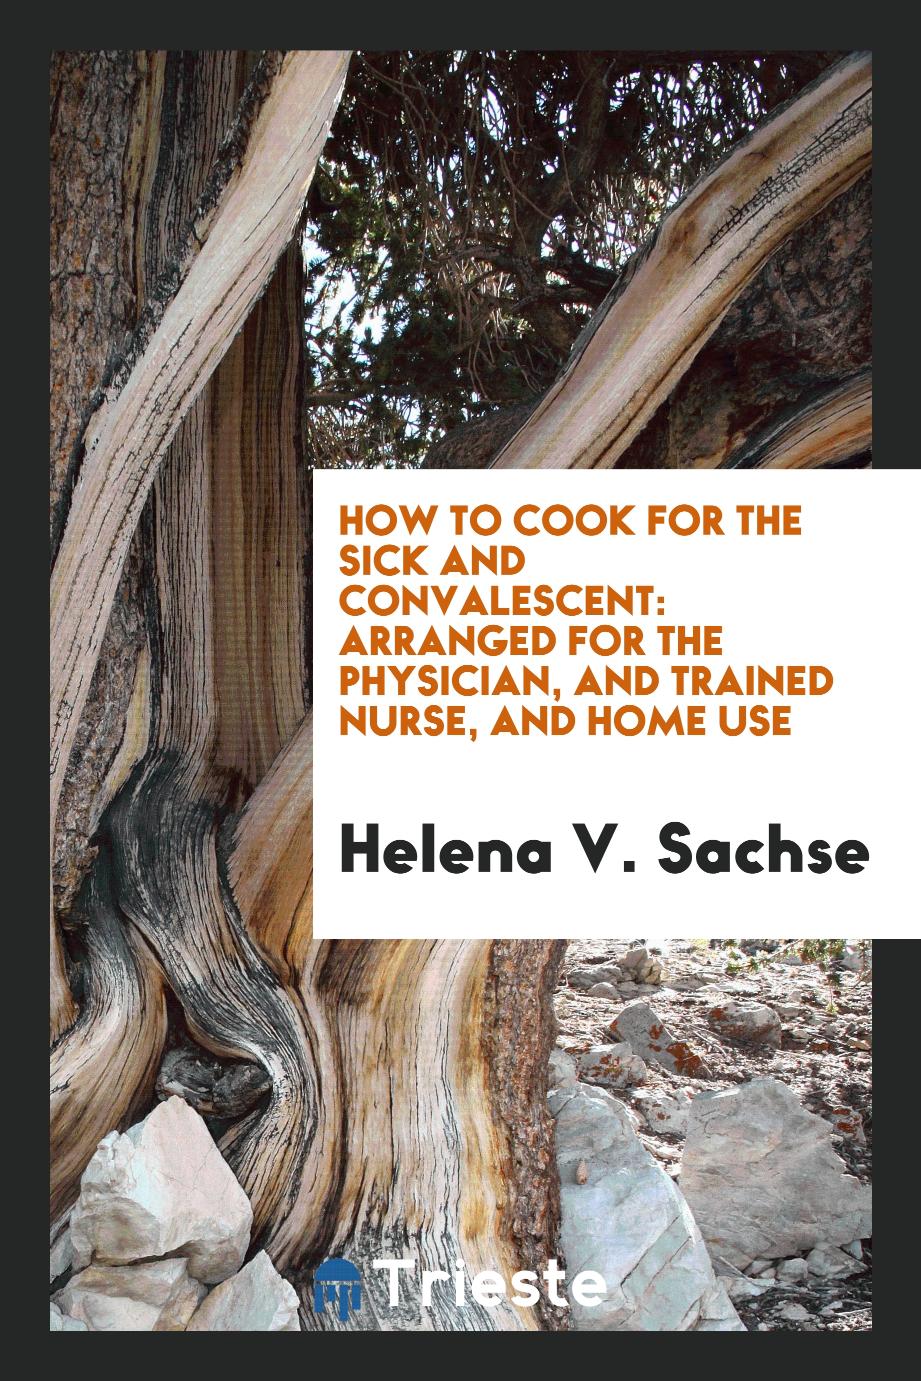 How to cook for the sick and convalescent: arranged for the physician, and trained nurse, and home use